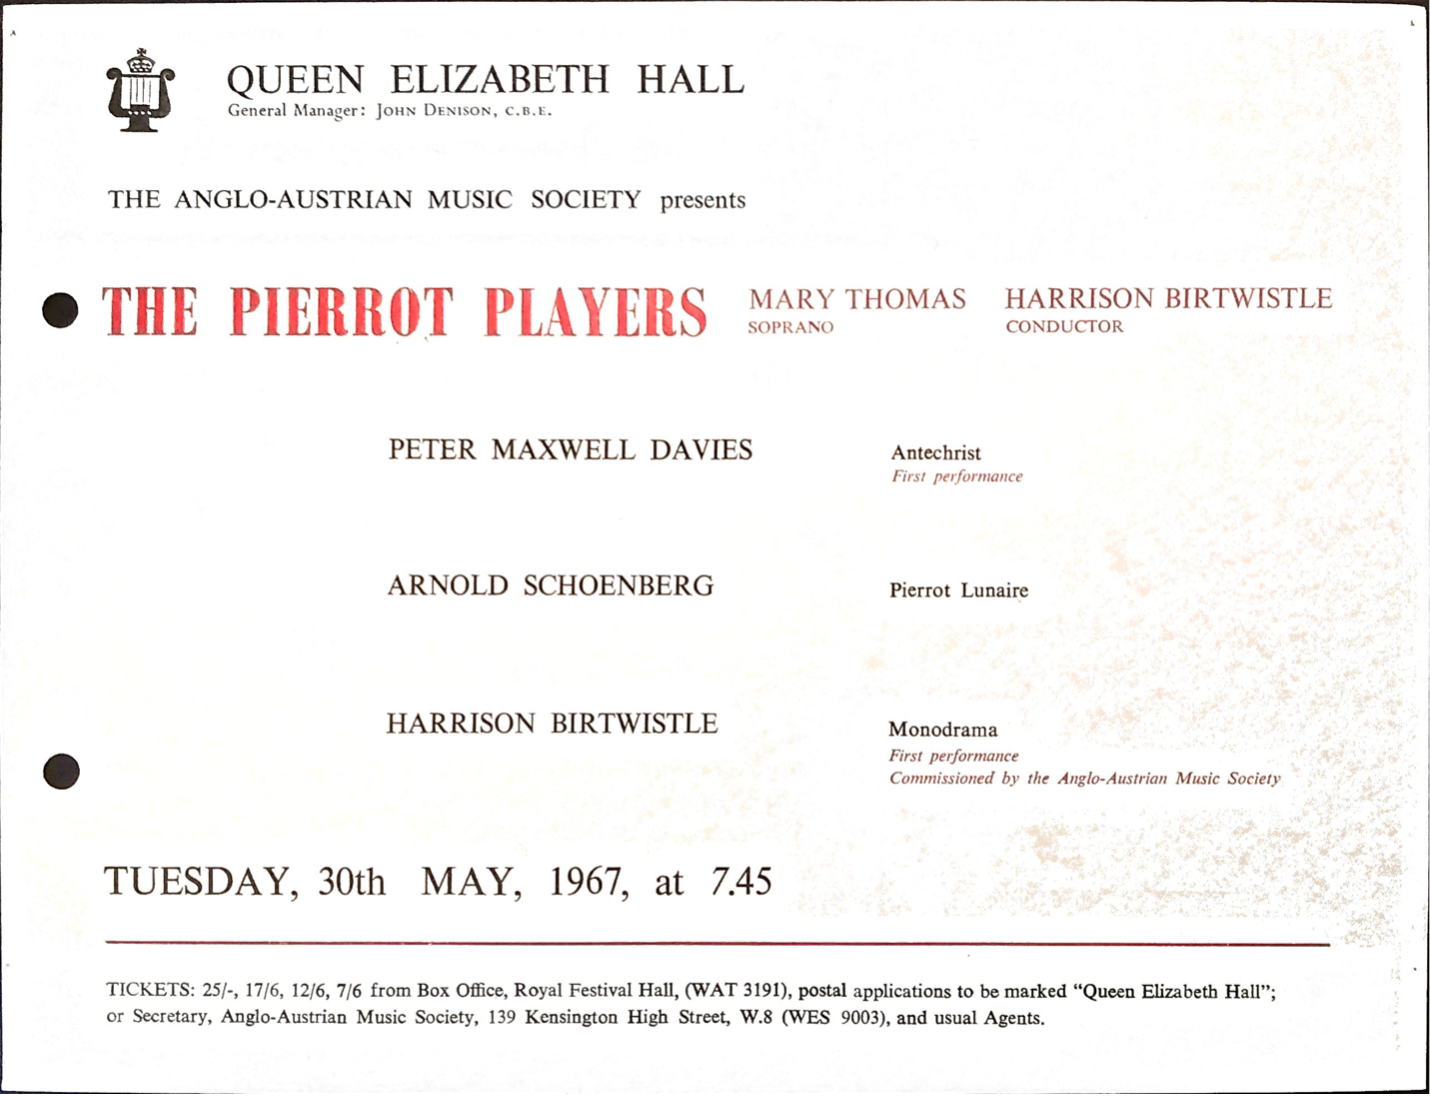 Page from programme booklet for a concert featuring works by Peter Maxwell Davies and Harrison Birtwistle, 30 May 1967 